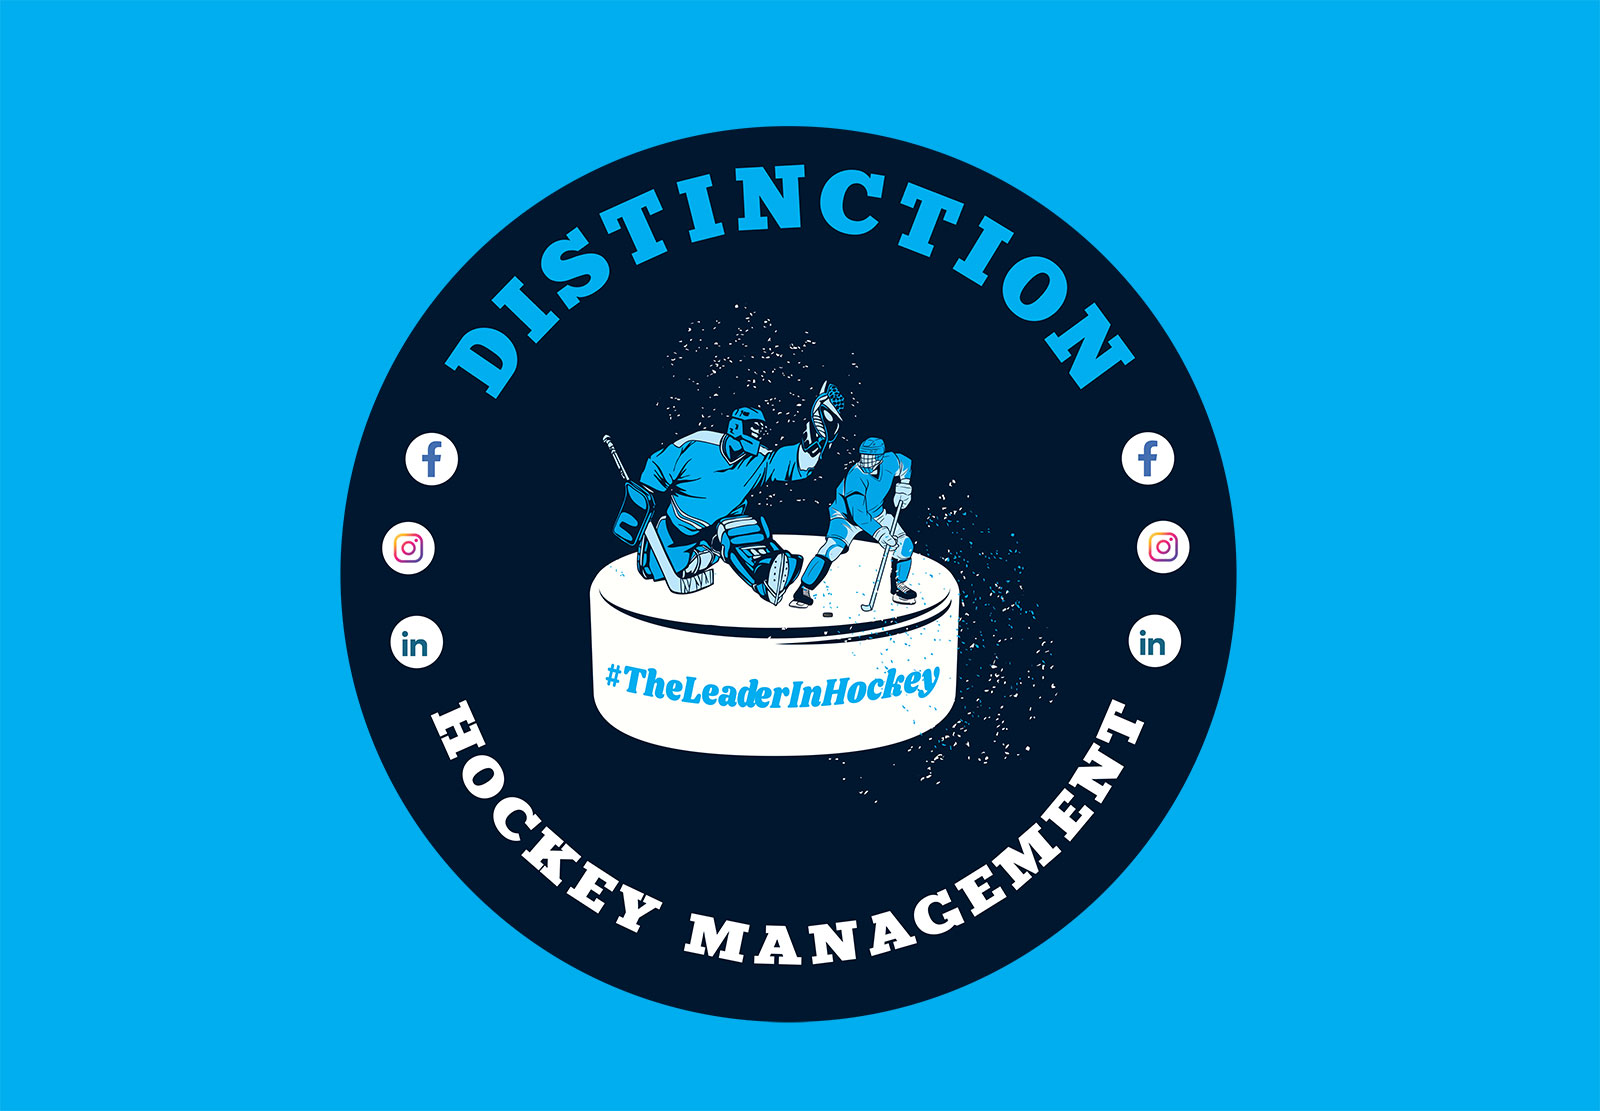 AN IMPORTANT PARTNERSHIP BETWEEN UNLIMITED SPORTS MANAGEMENT AND DISTINCTION HOCKEY MANAGEMENT